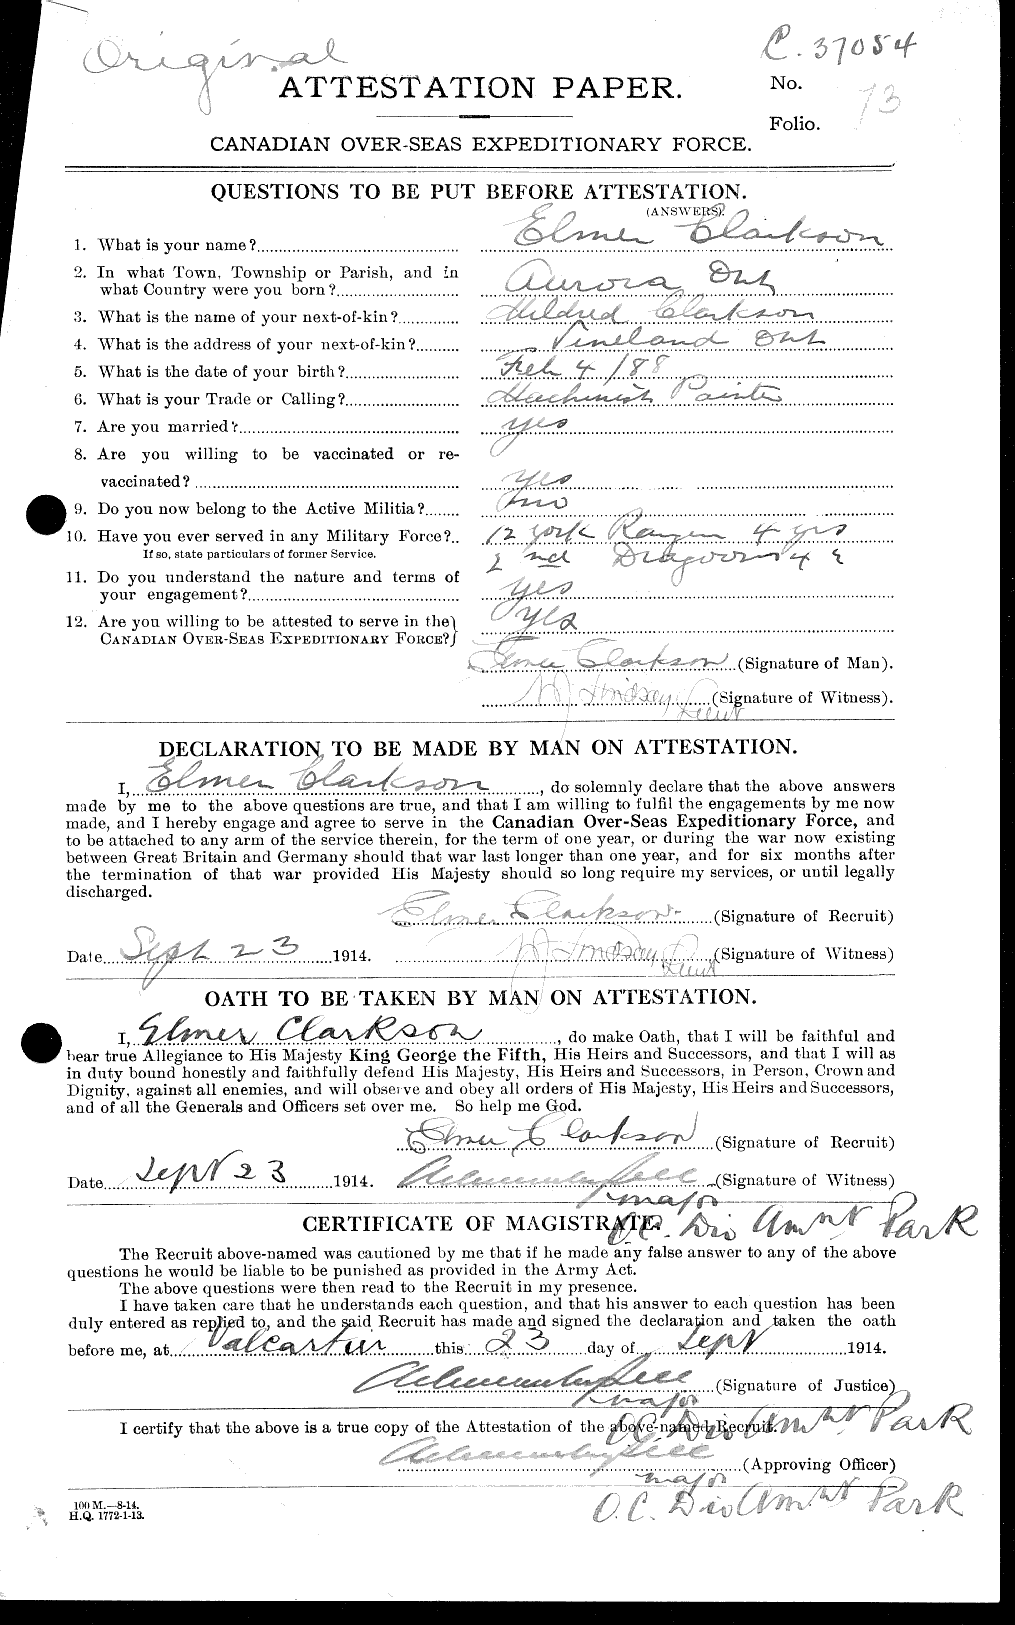 Personnel Records of the First World War - CEF 023633a